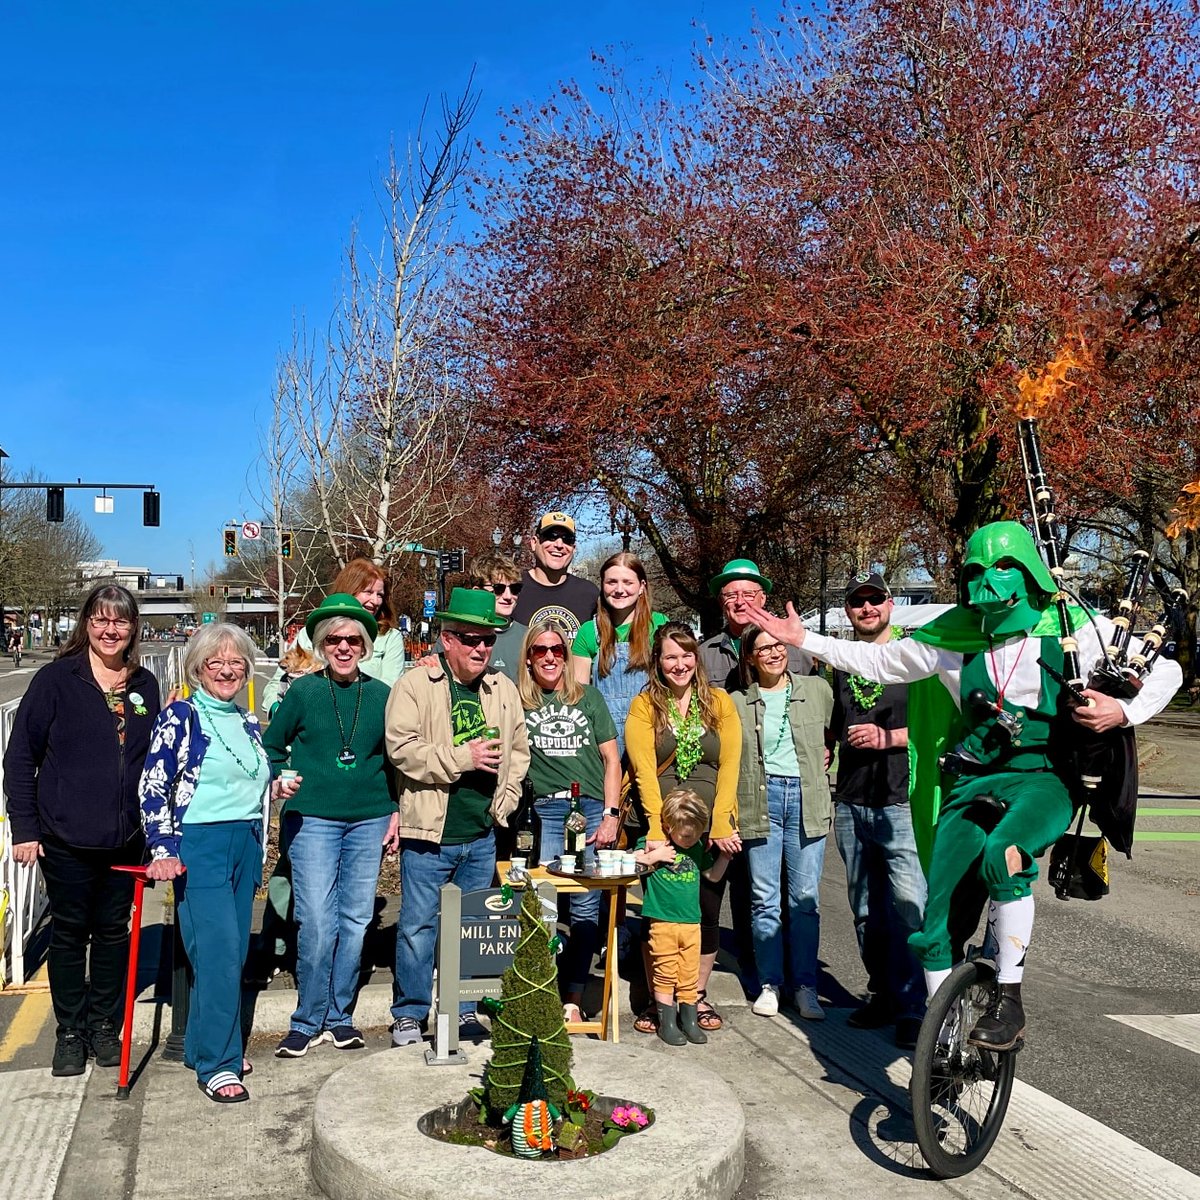 This is the family of Dick Fagan, the columnist for The #Oregon Journal who founded Mill Ends Park (a.k.a. the Smallest Park in the World). I was very fortunate to have had the chance to celebrate Dick's memory with them. What a beautiful moment in weird #Portland history. ♥🌈